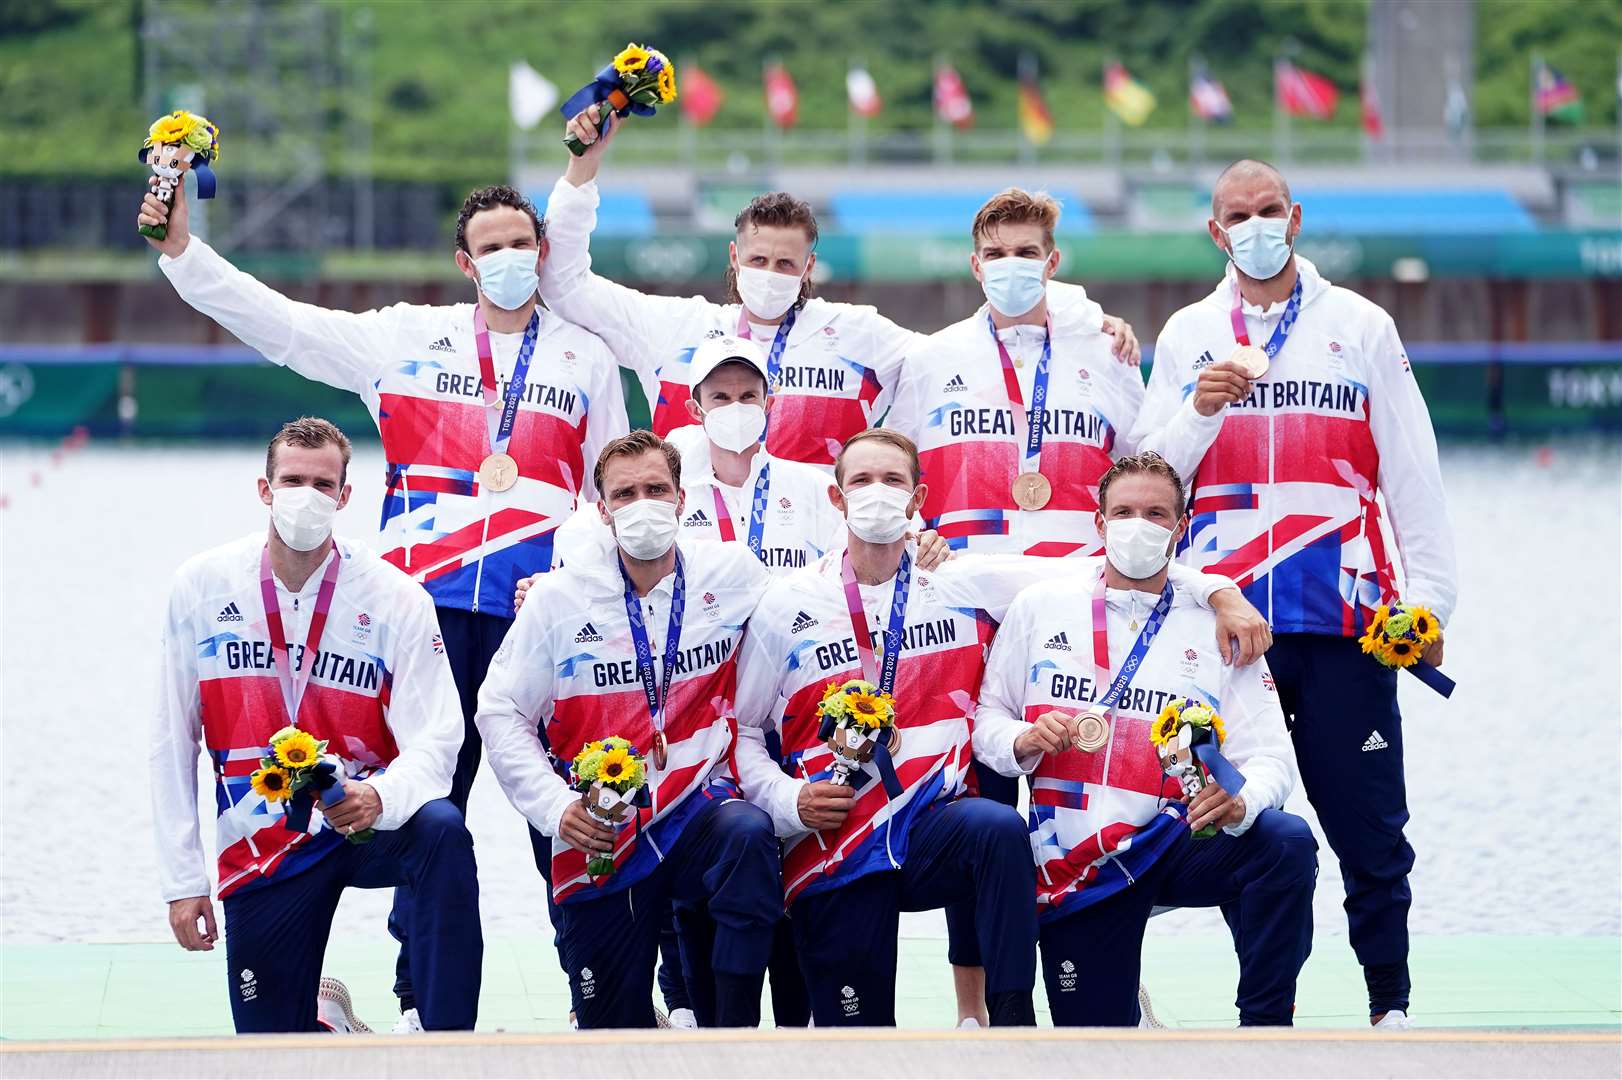 It's been a great Olympics got Team GB so far. Photo credit: Mike Egerton/PA Wire.